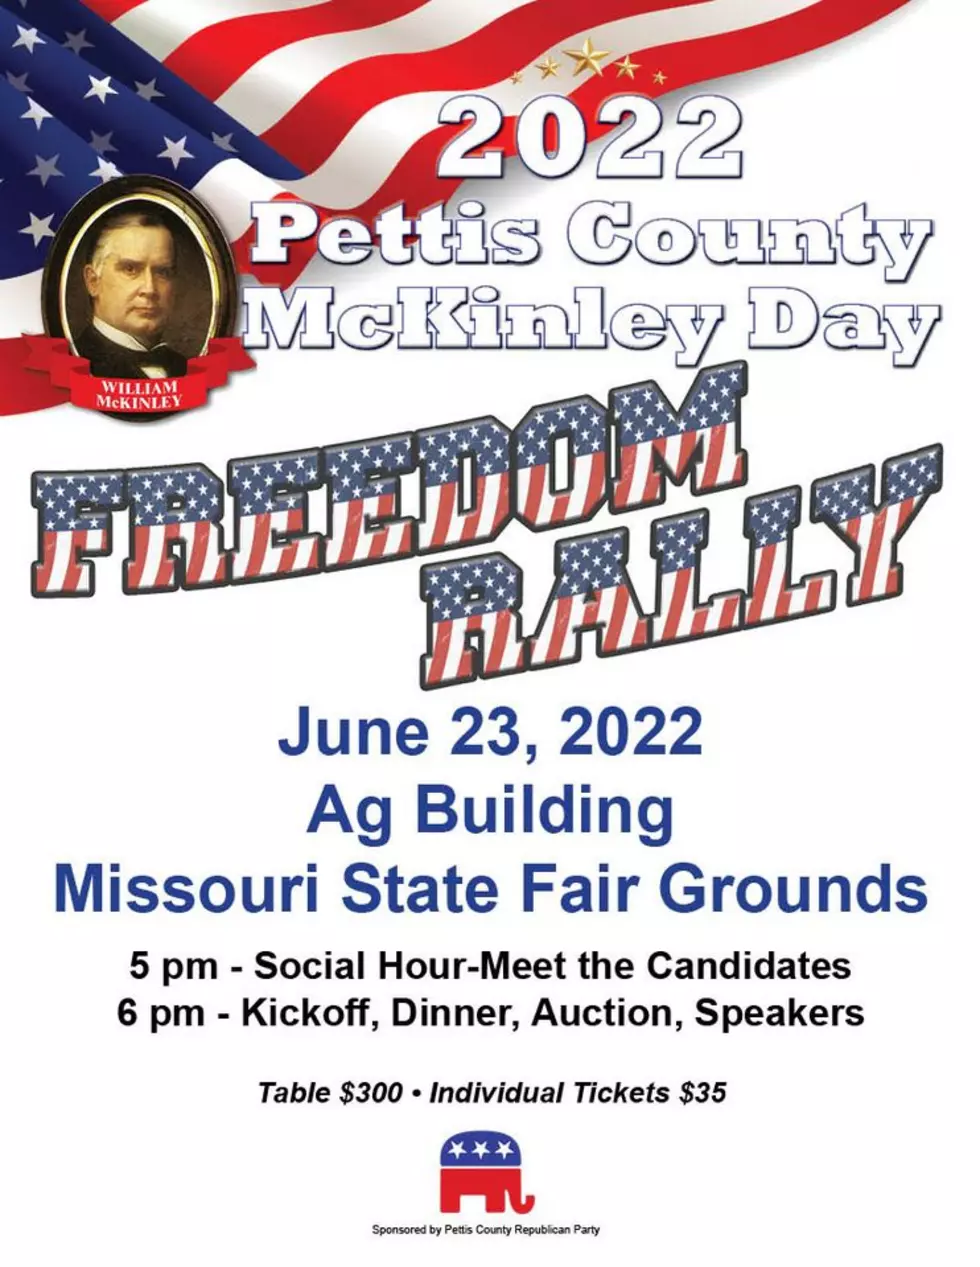 McKinley Day &#8216;Freedom Rally&#8217; is June 23